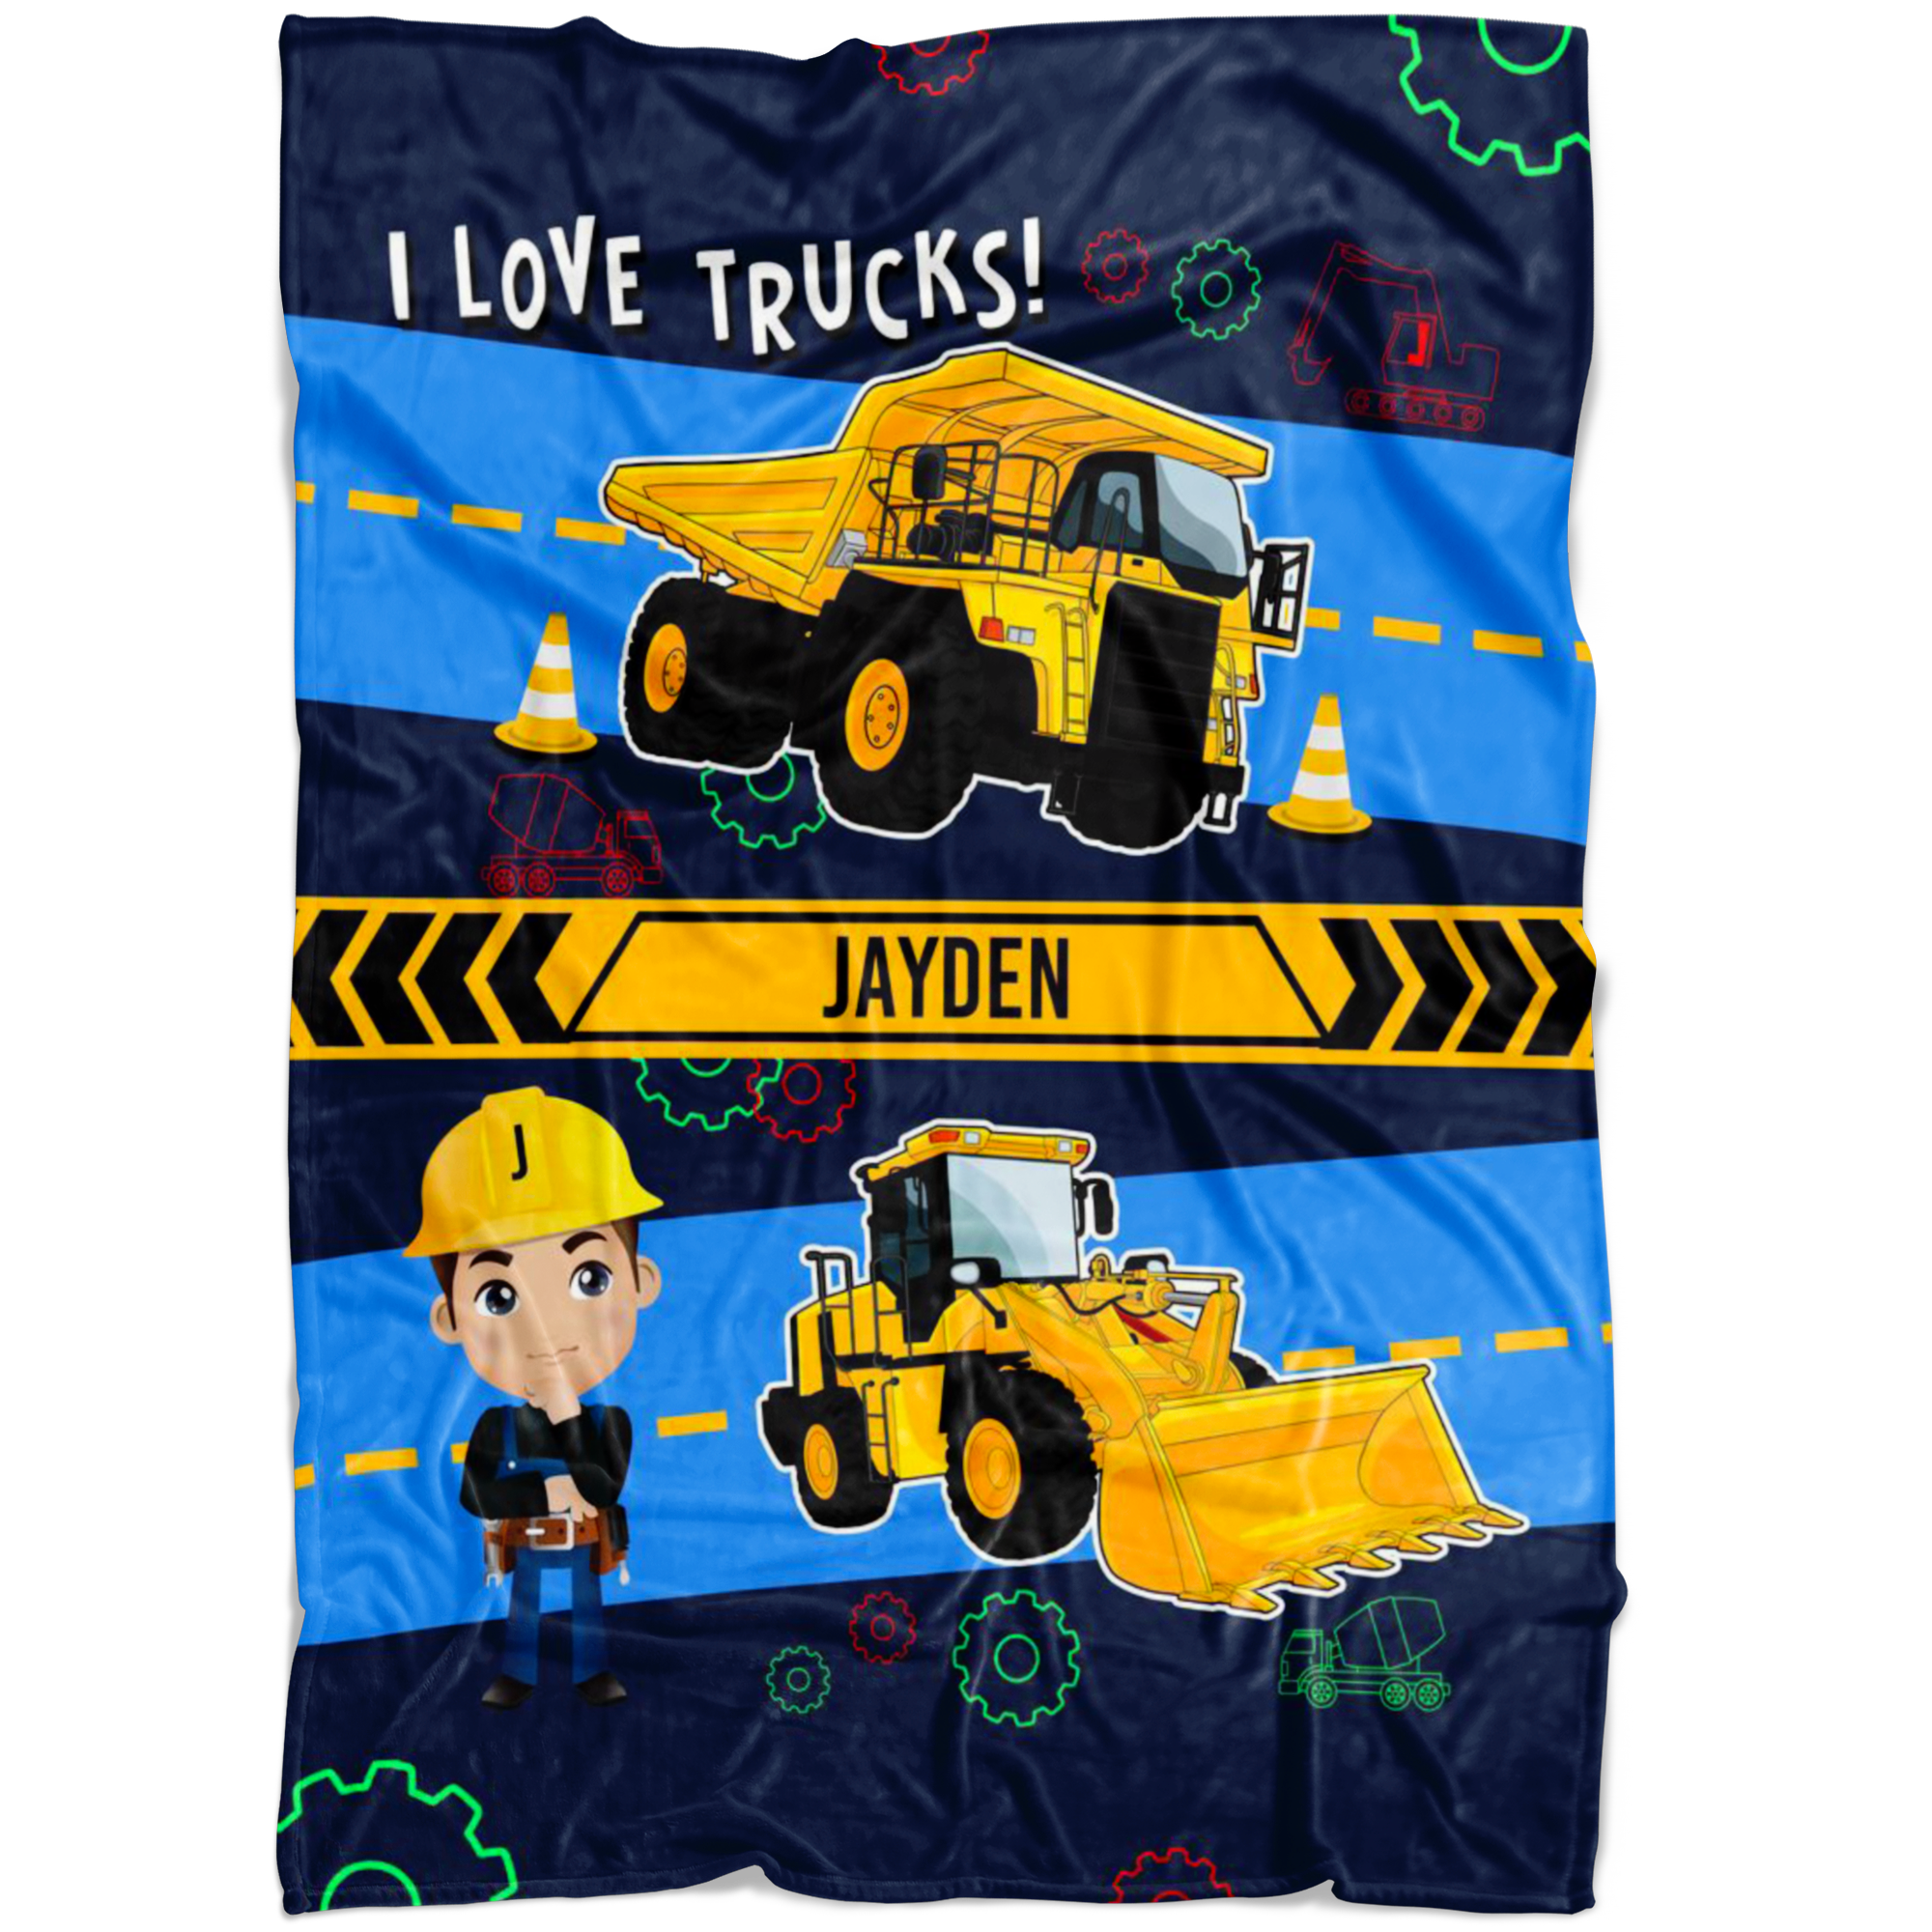 Personalized Name I Love Trucks Blanket for Boys & Girls with Character Personalization - Jayden